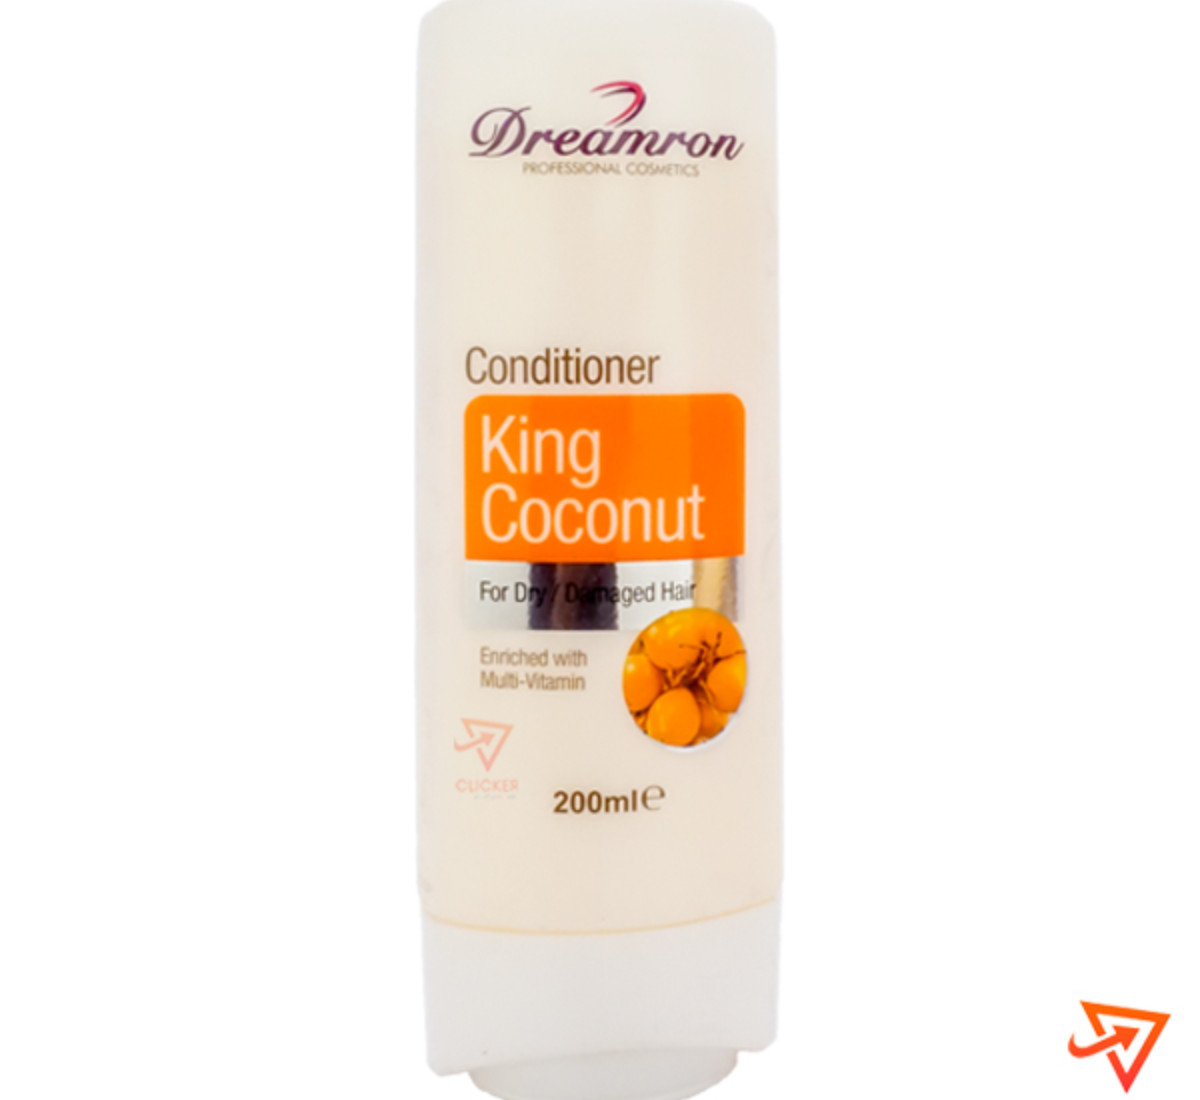 Clicker product 200ml Dreamron conditioner king coconut Enriched with Multi- vitamin 1059